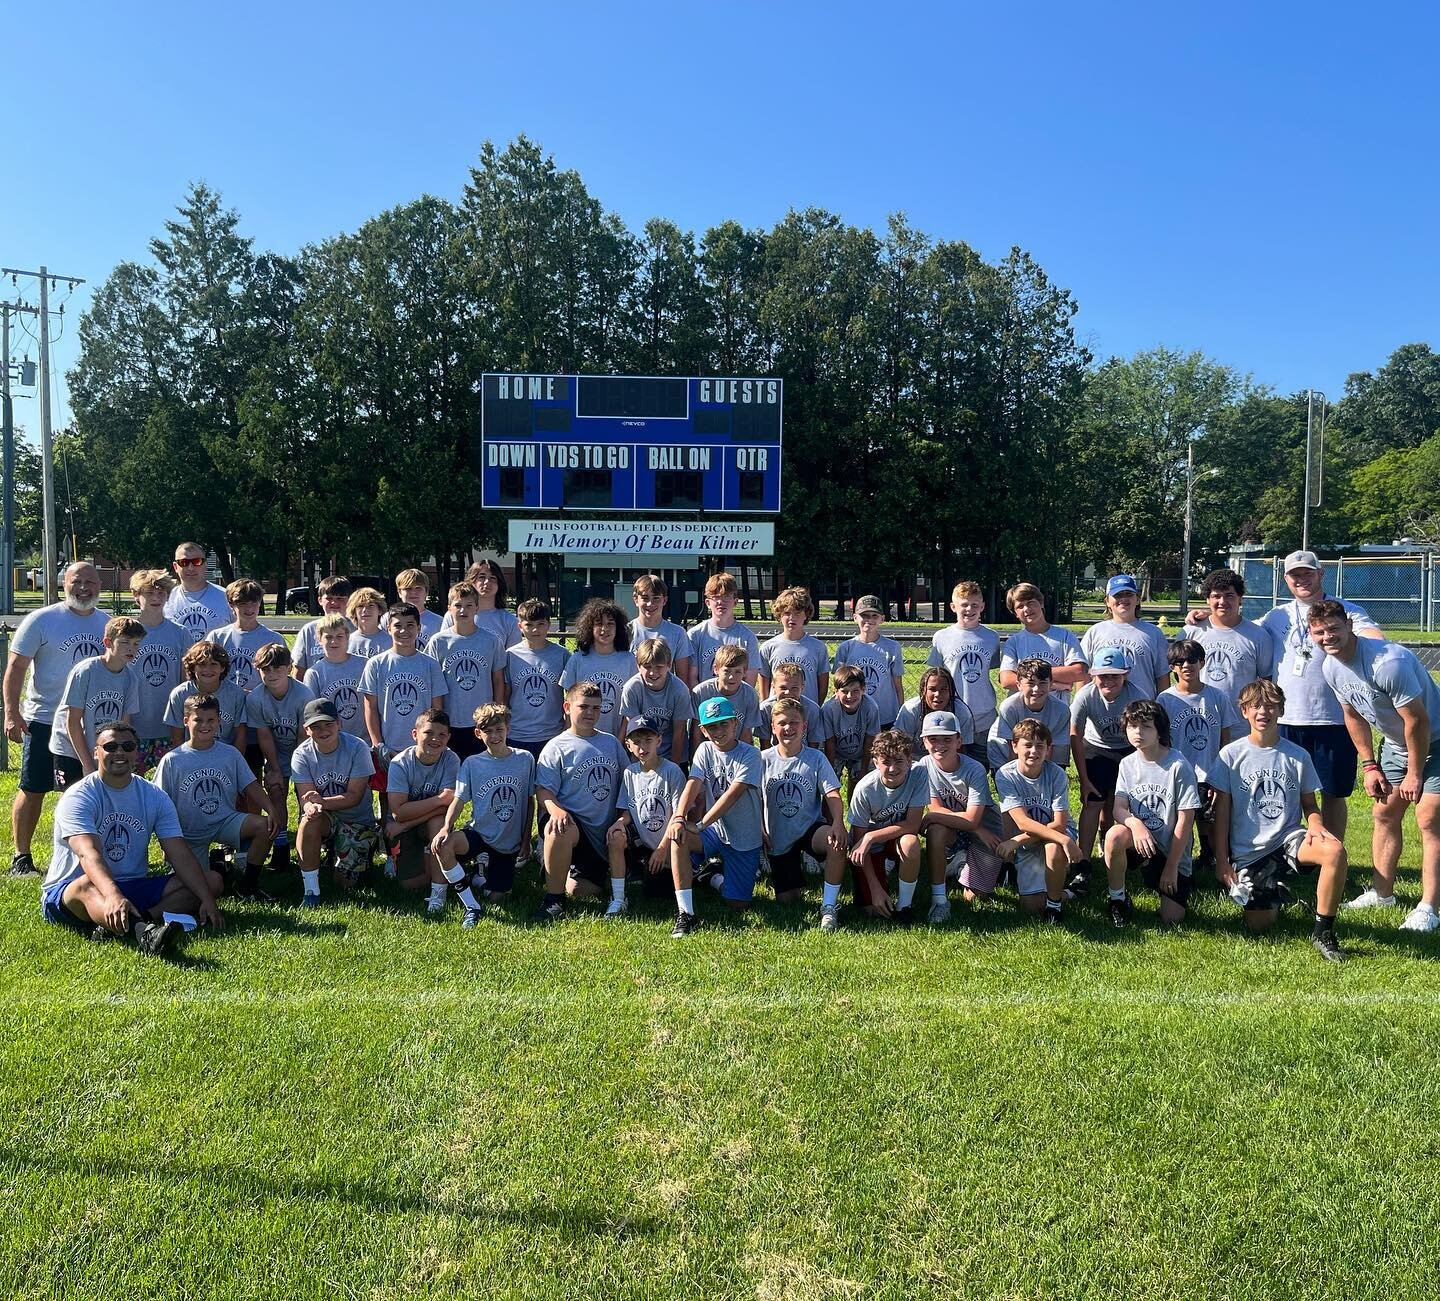 On behalf of Legendary Sports Training we would like to thank all the families that chose our camp and to train with us! We had a great week with the next generation of football players! #legendarysportstraining #youthfootballtraining #youthfootball 